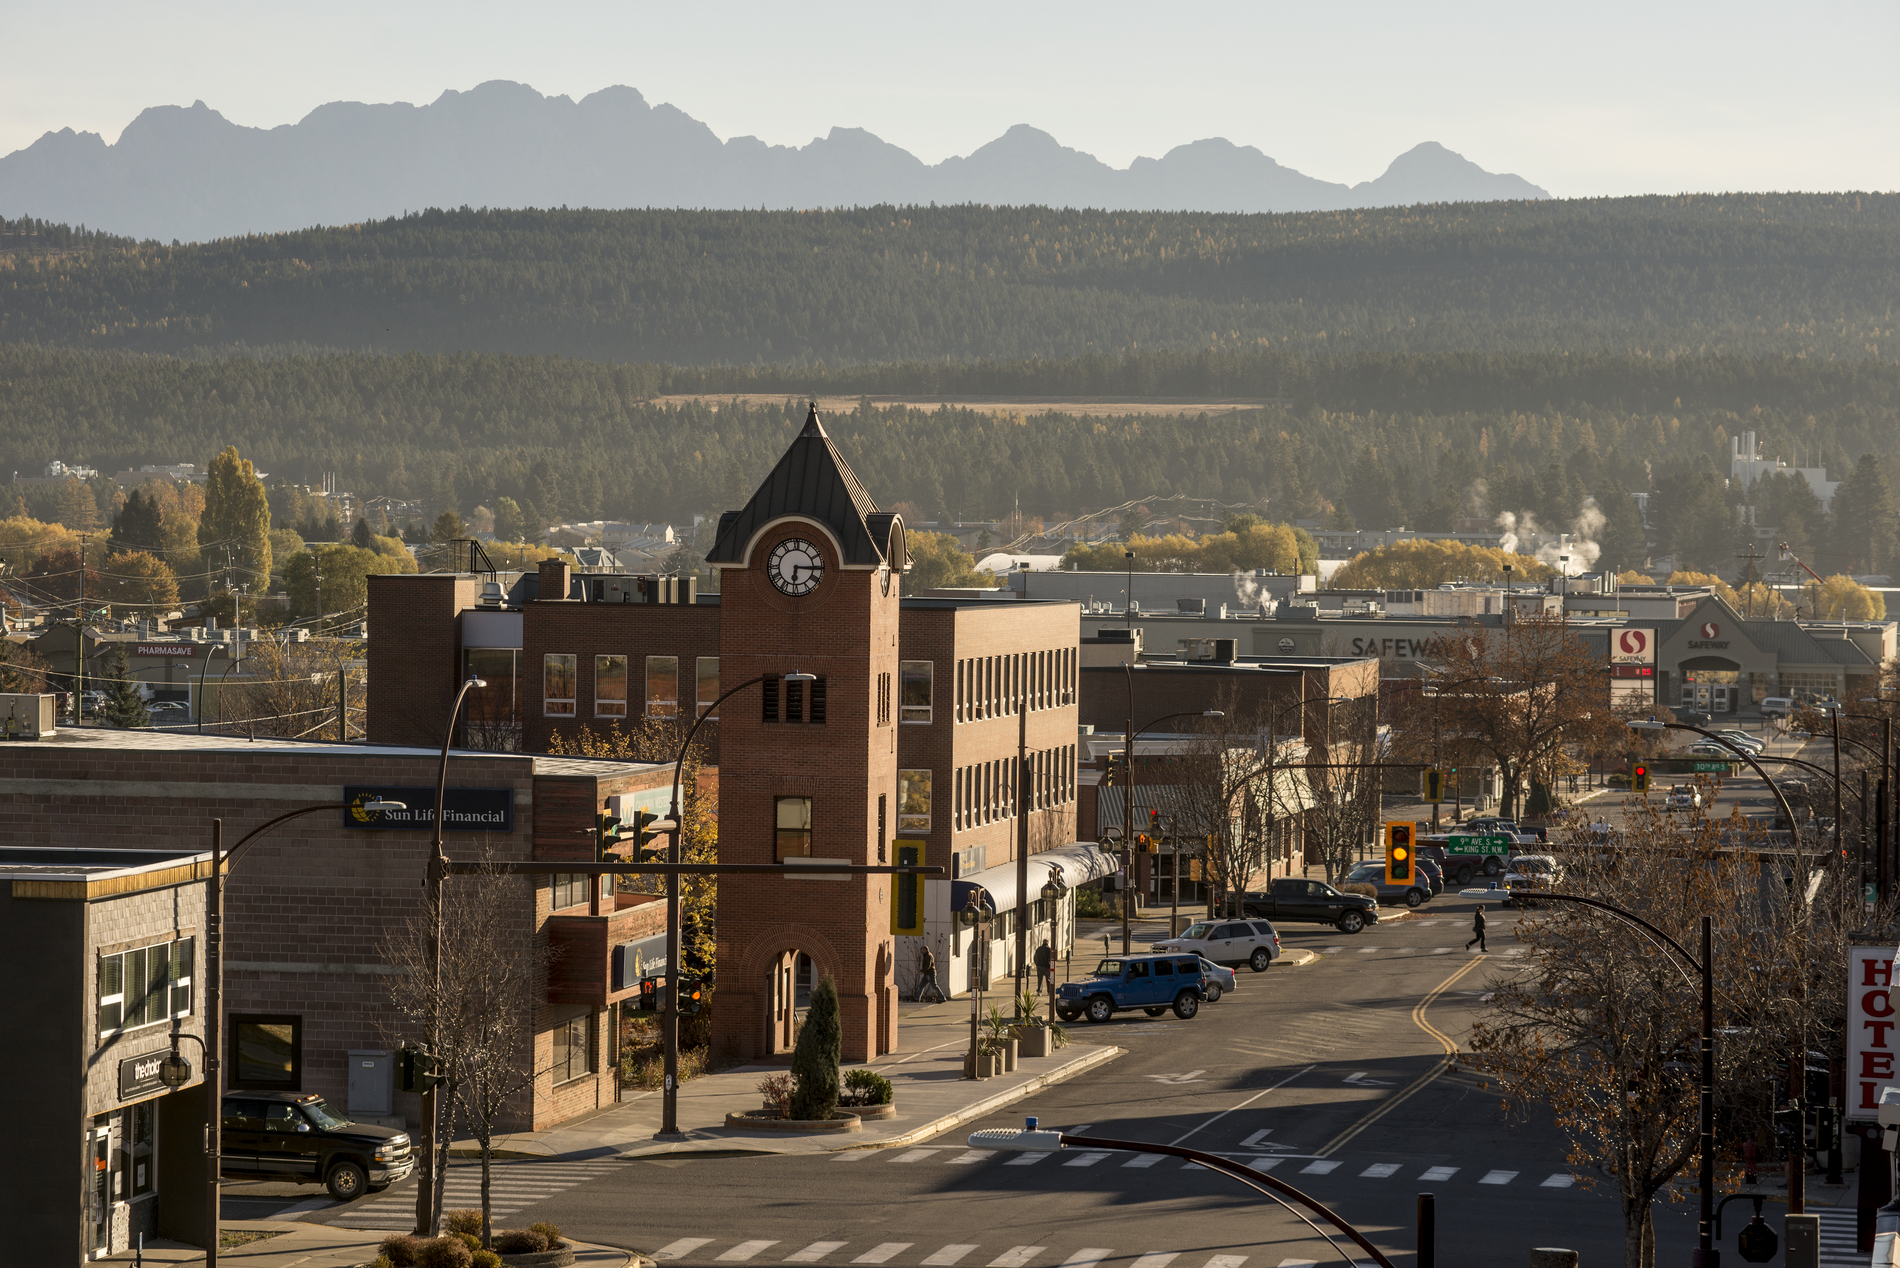 Downtown Cranbrook in the daytime